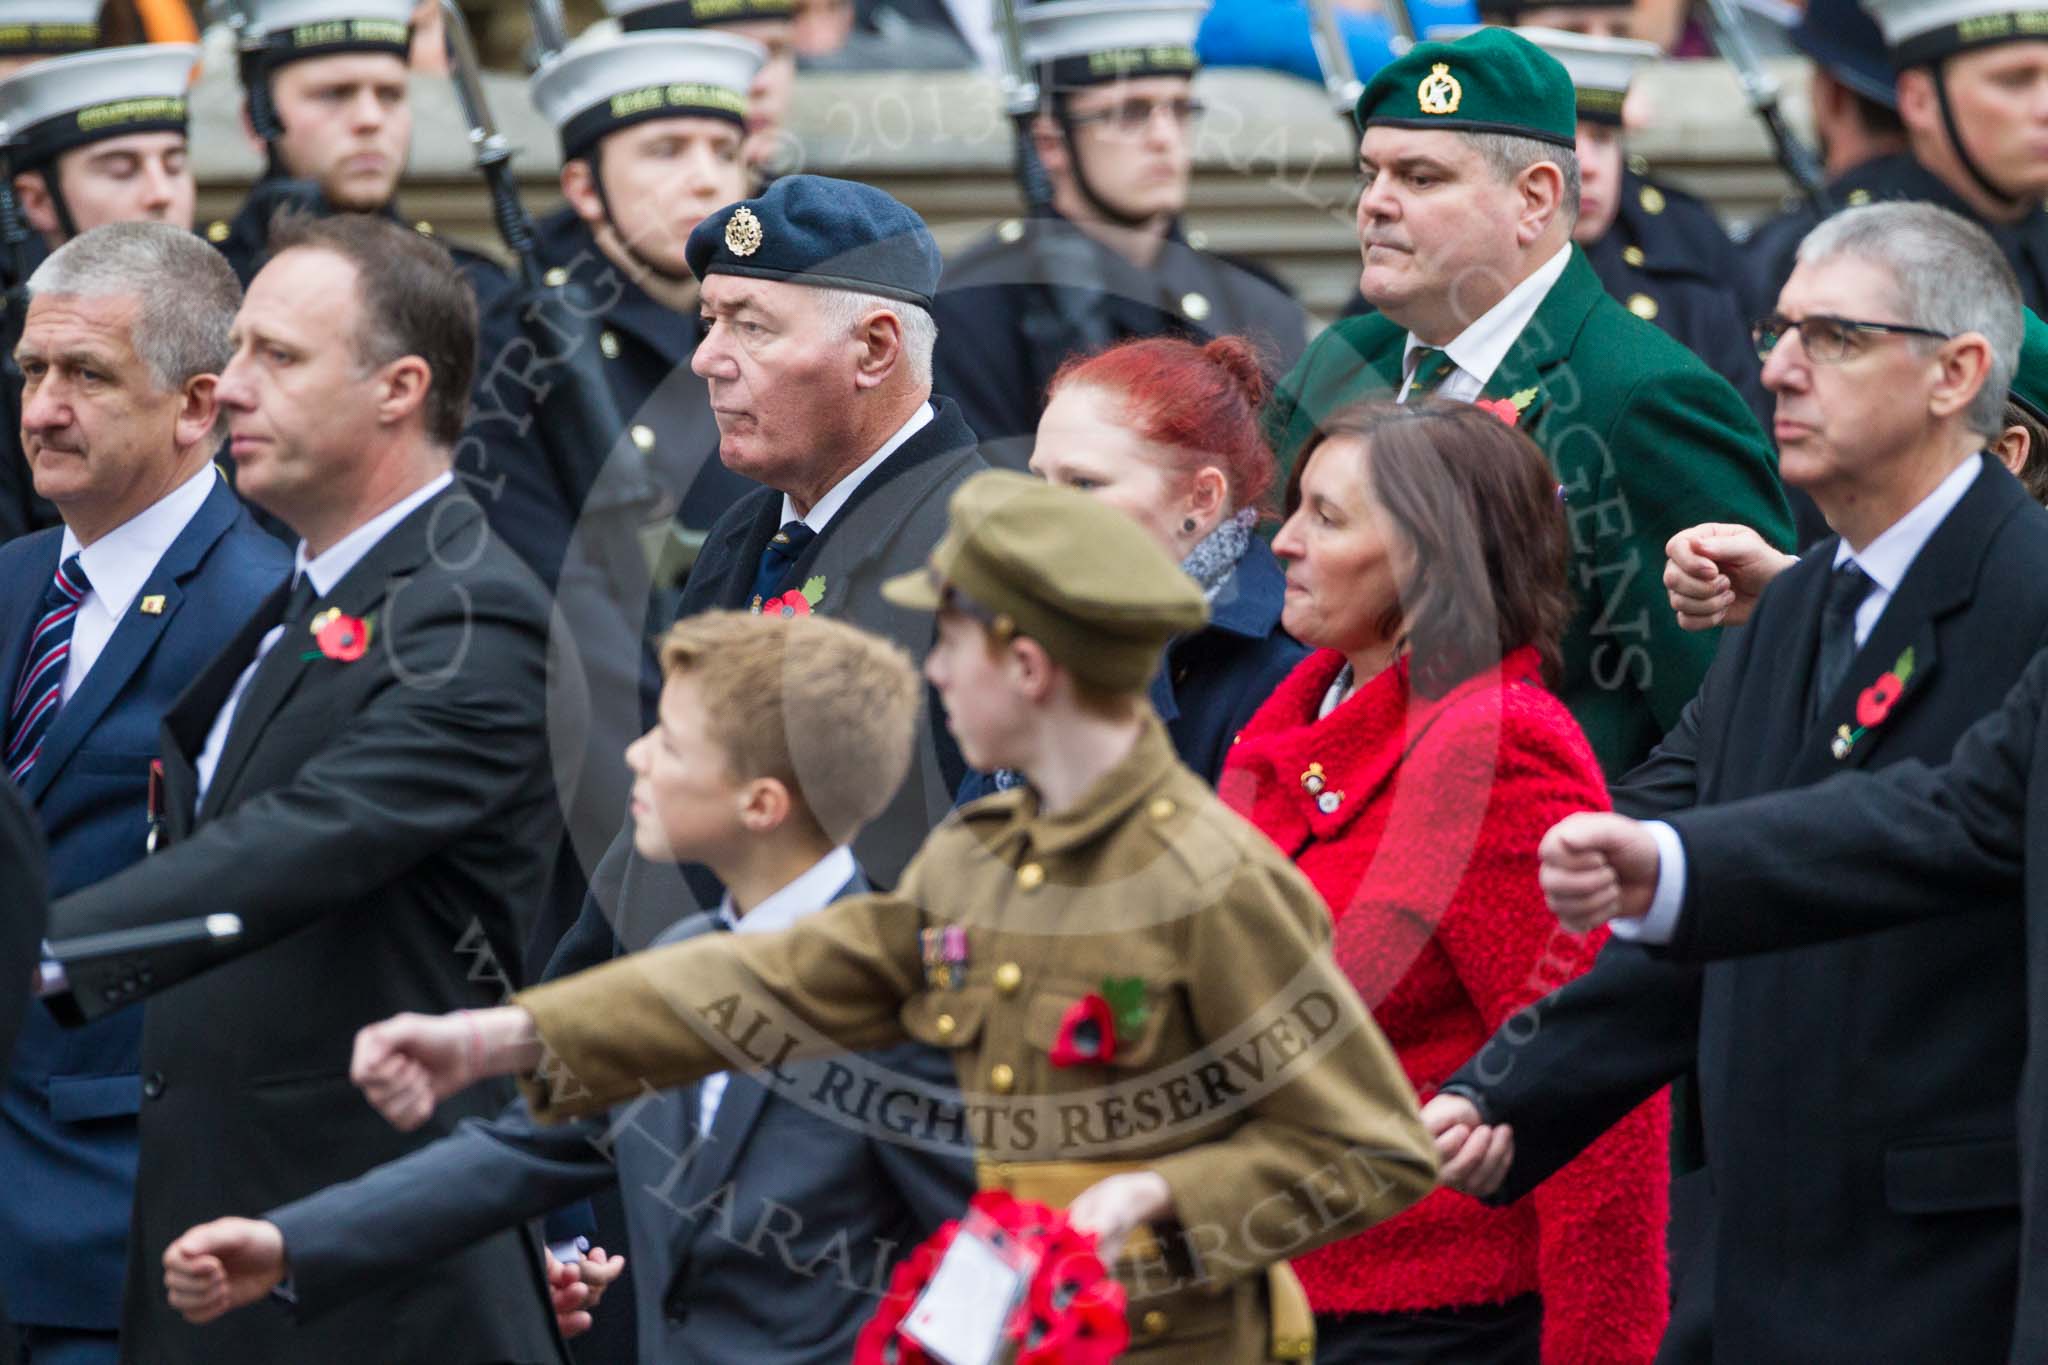 Remembrance Sunday at the Cenotaph 2015: Group F8, The Royal British Legion Poppy Factory.
Cenotaph, Whitehall, London SW1,
London,
Greater London,
United Kingdom,
on 08 November 2015 at 12:04, image #1041